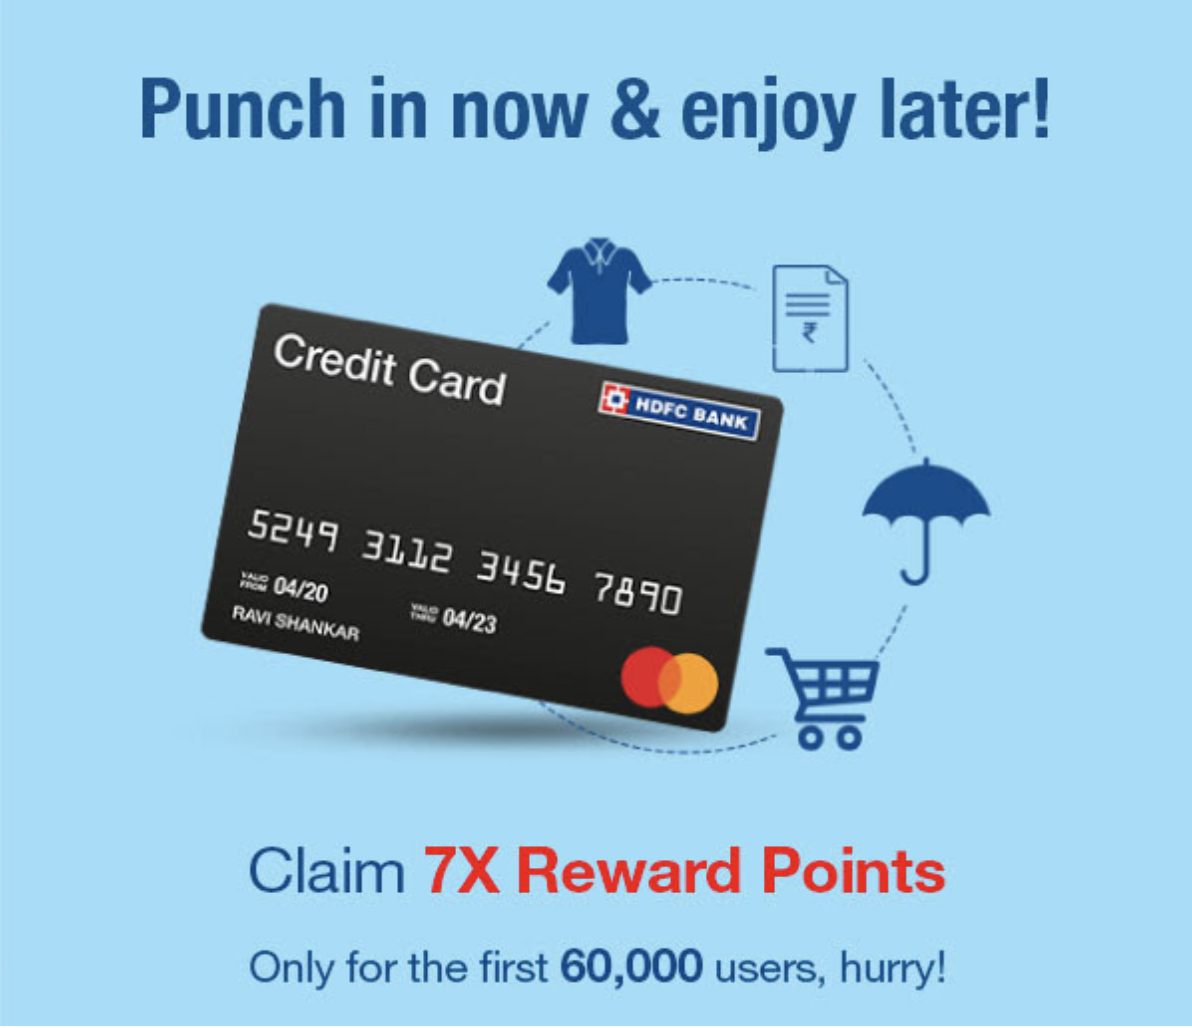 HDFC MasterCard Credit Card Offers get 7X Reward Points Cards